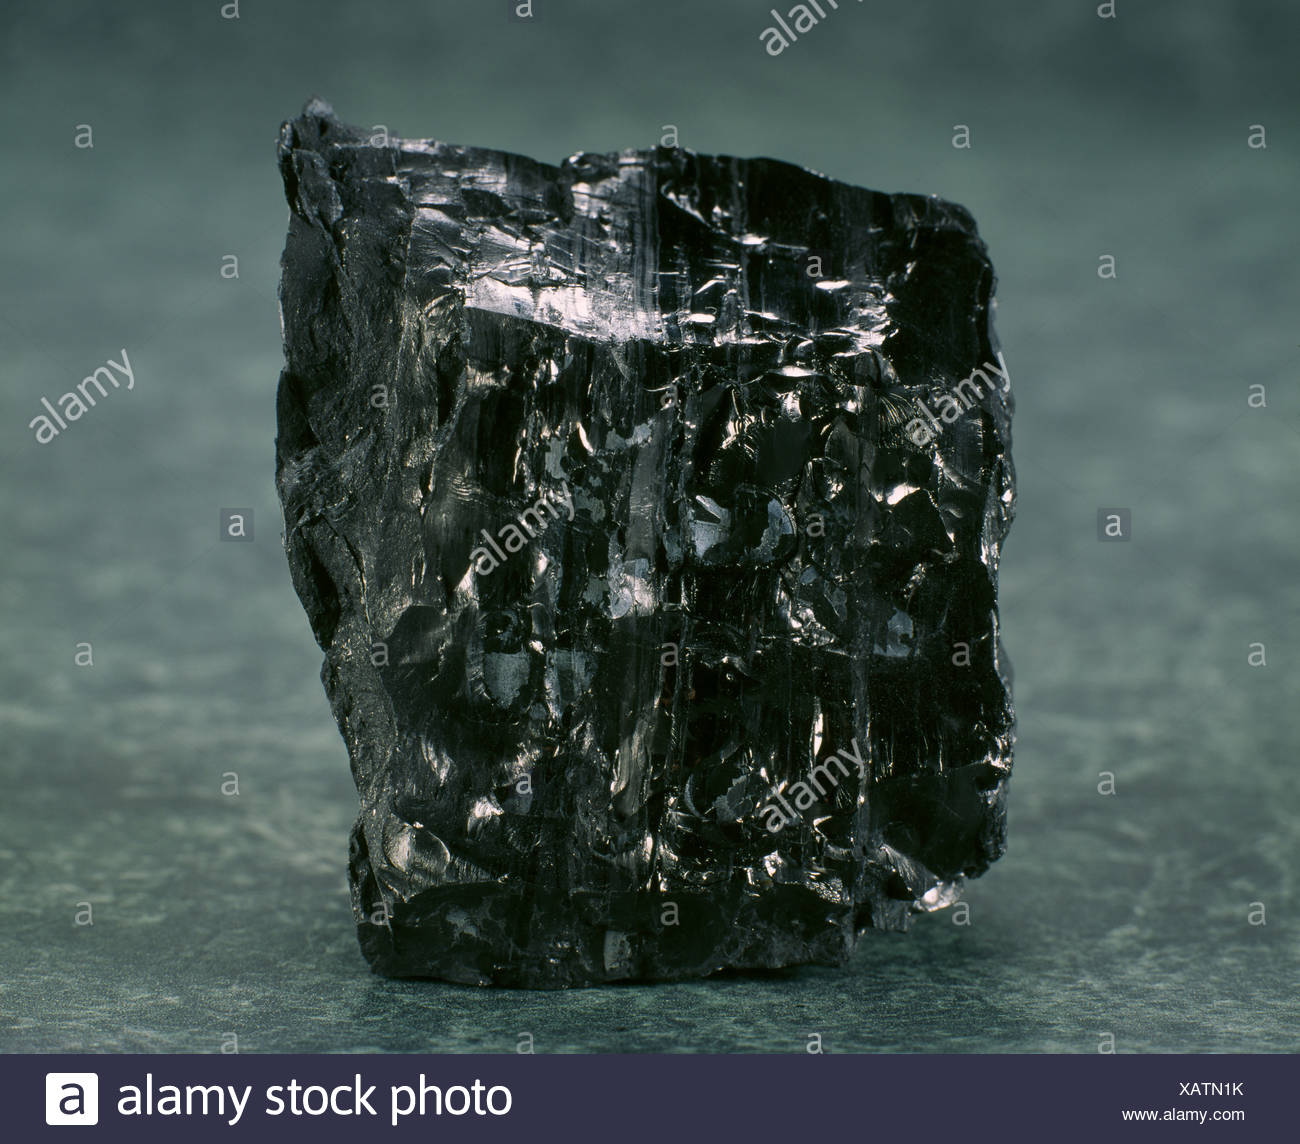 COAL ANTHRACITE FIXED CARBON USED AS DOMESTIC FUEL BECAUSE OF ITS SMOKELESS  QUALITY AND HIGH ENERGY OUTPUT Stock Photo - Alamy